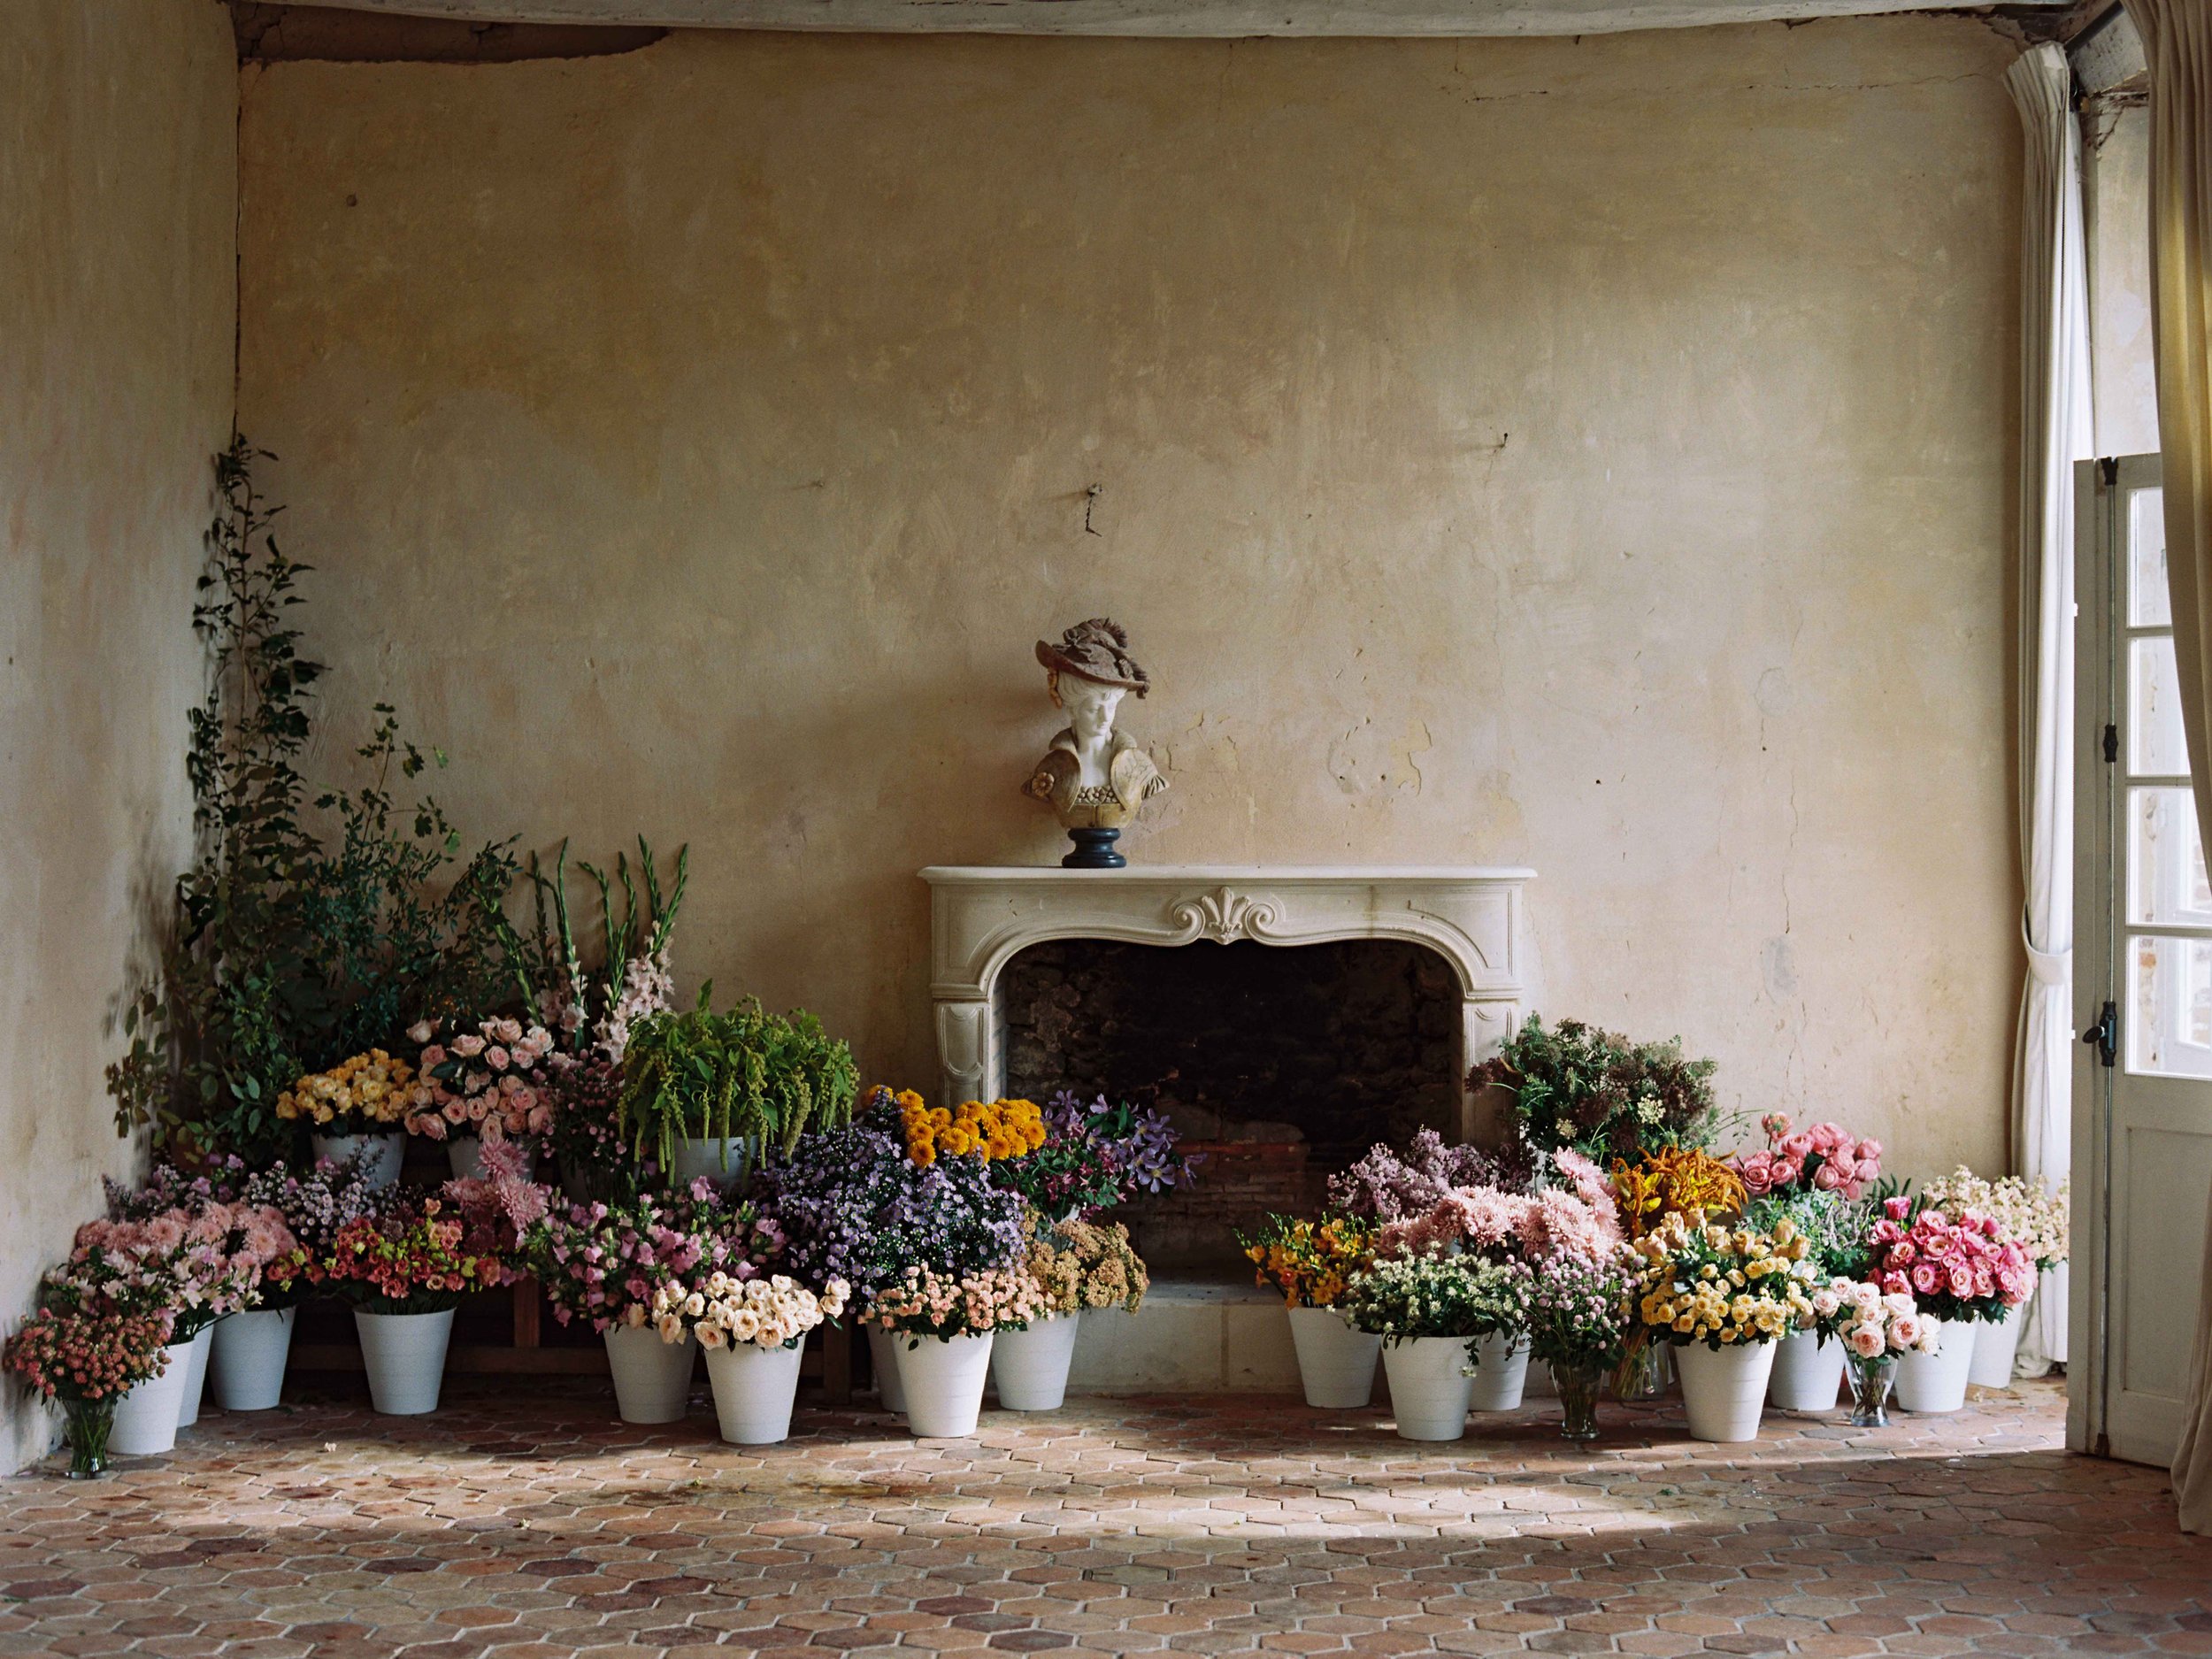 The Orangerie full of flowers organised around the fireplace, ready for a floral workshop.